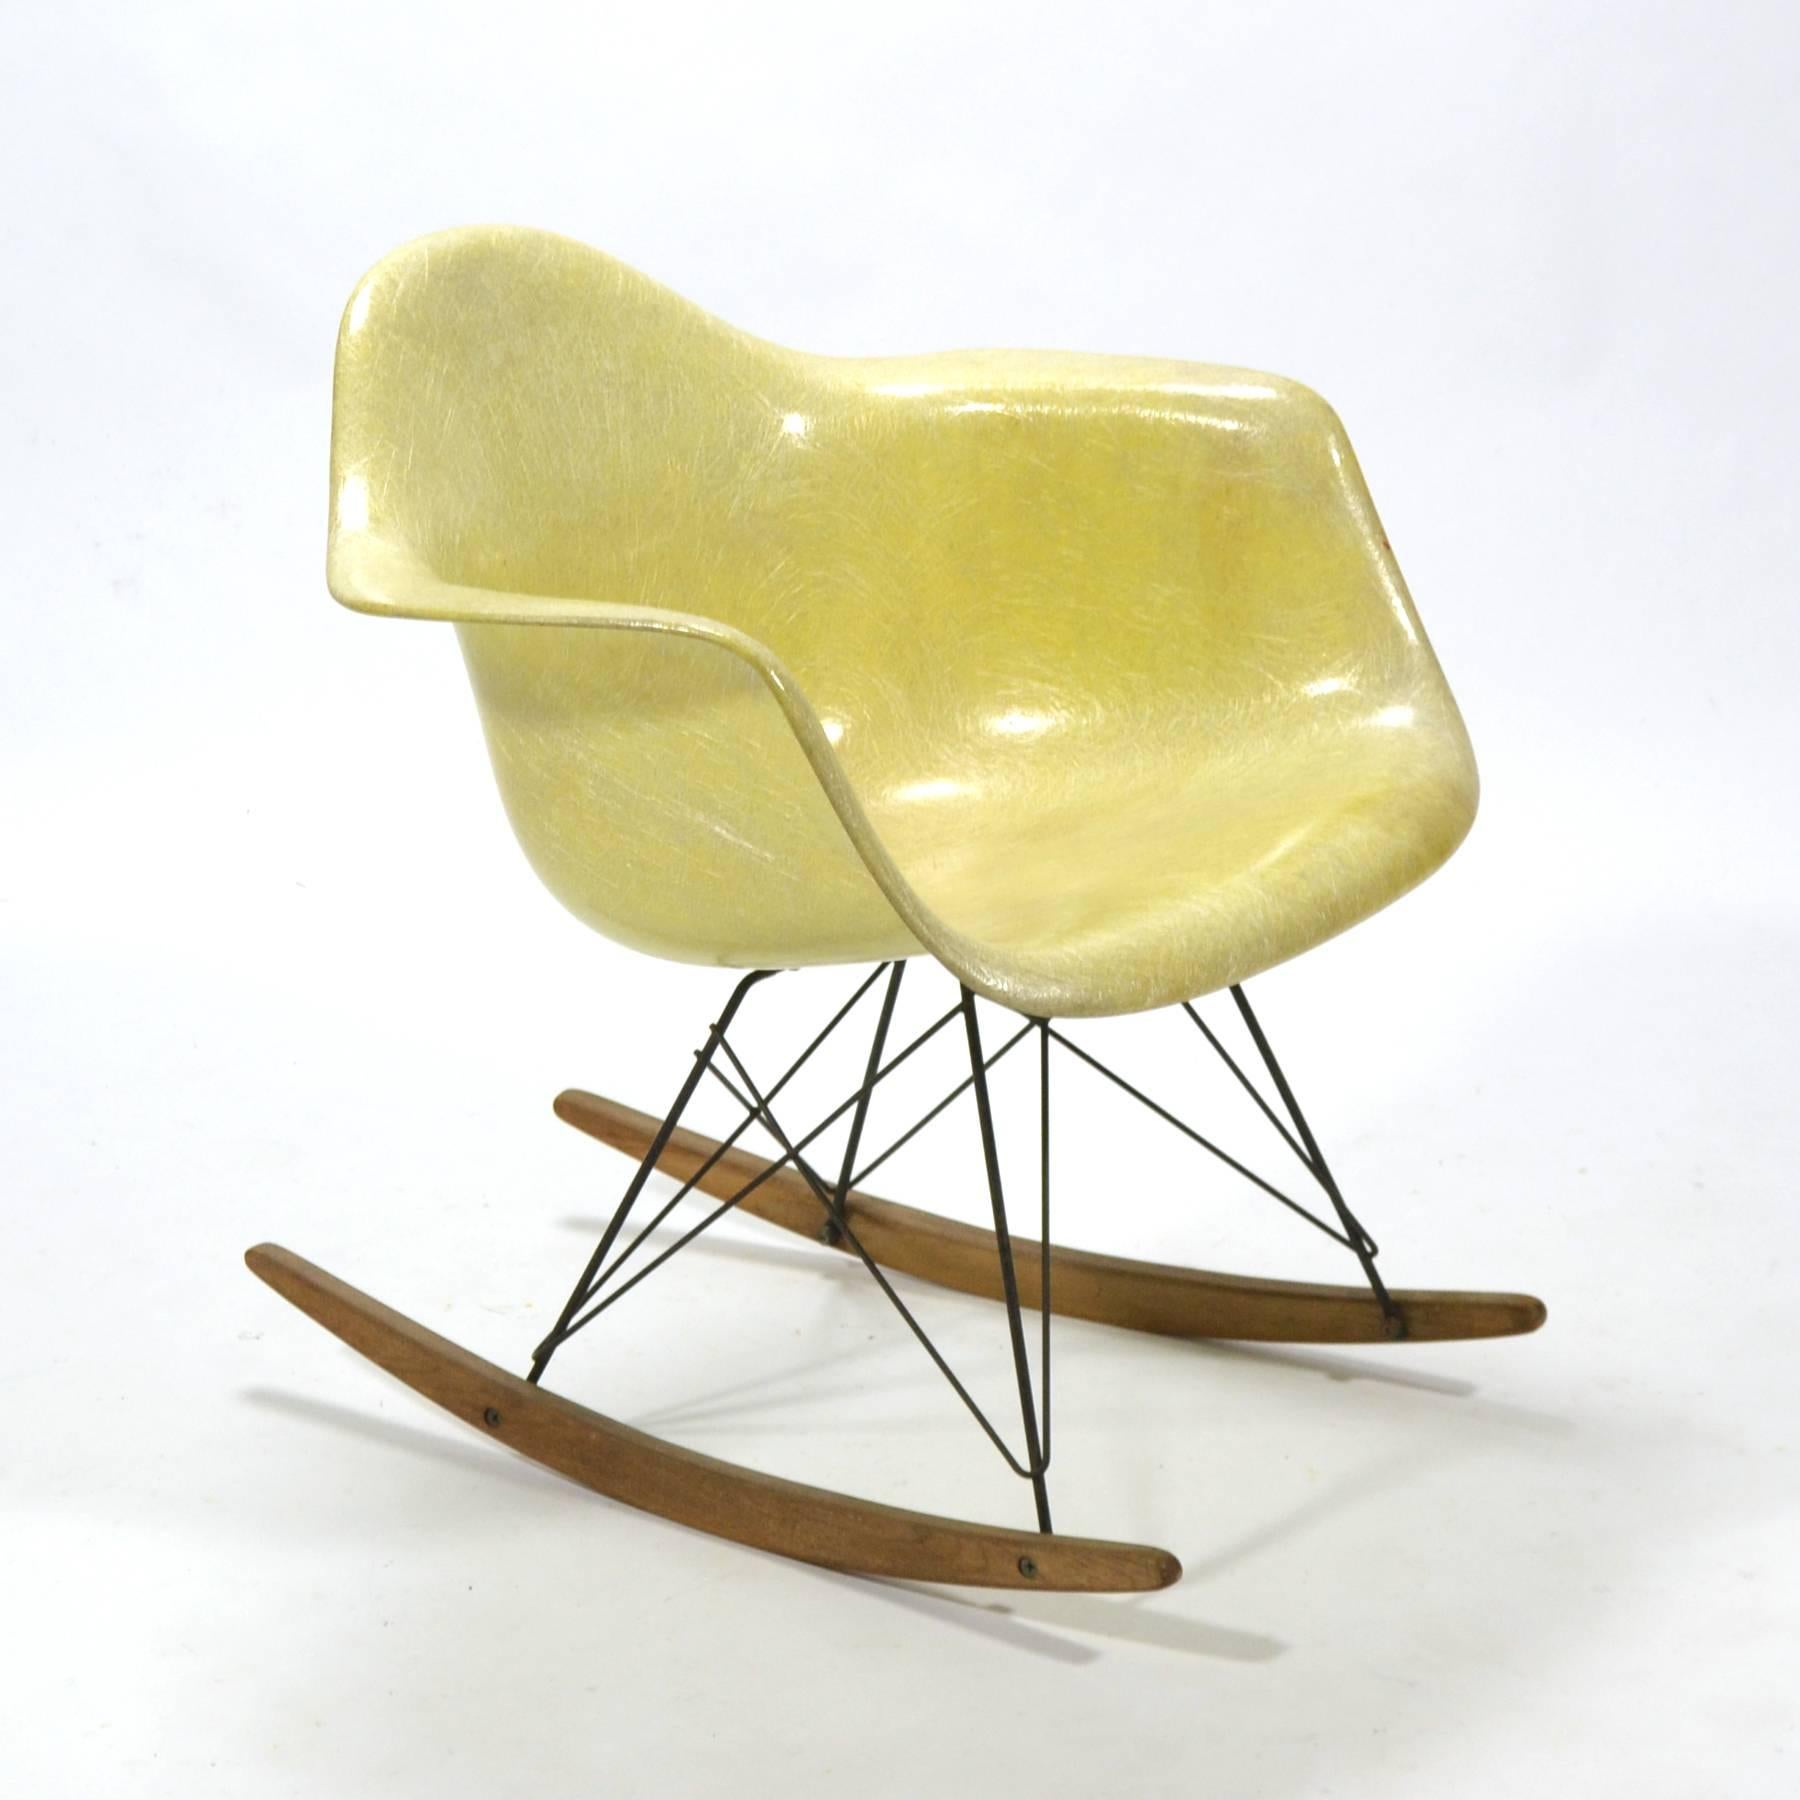 The first fiberglass Eames chairs were produced by Zenith Plastics. The early Zenith shells are distinctive for their high fiber content and larger, more substantial rubber shock mounts, a translucent quality and an embedded rope at the edge of the